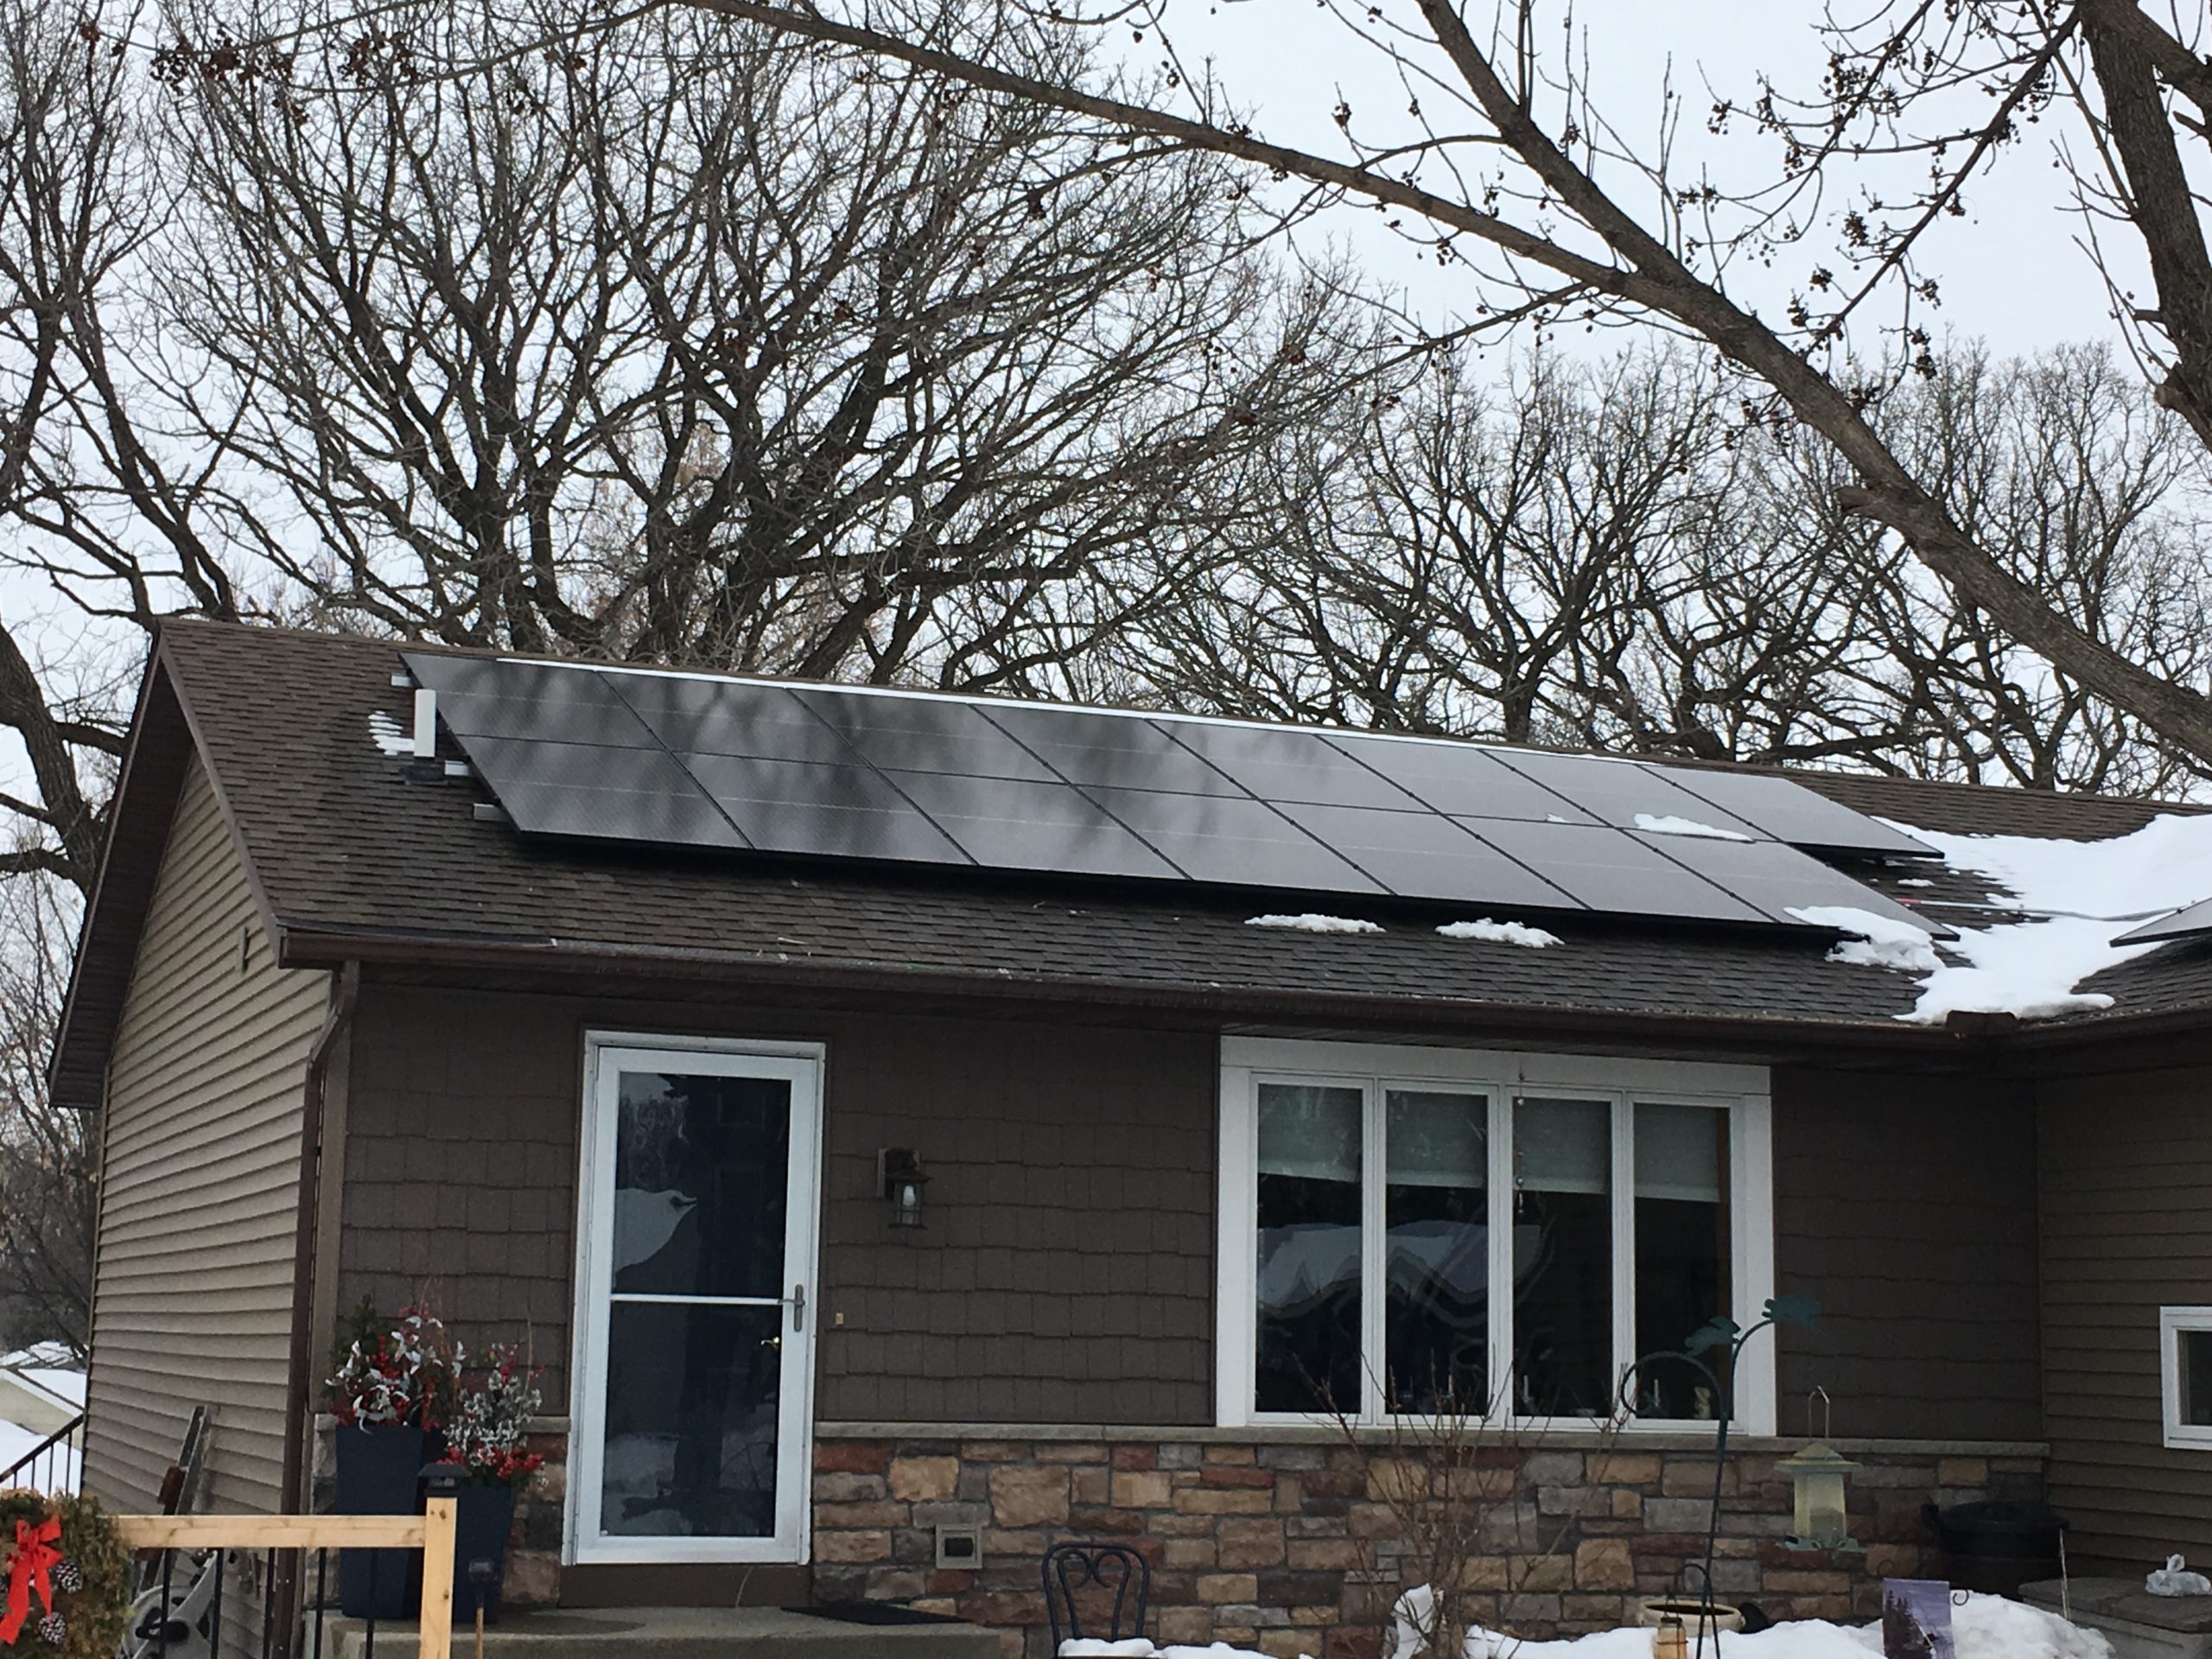 norwood-young-america-mn-10-89kw-rooftop-solar-optimum-energy-group